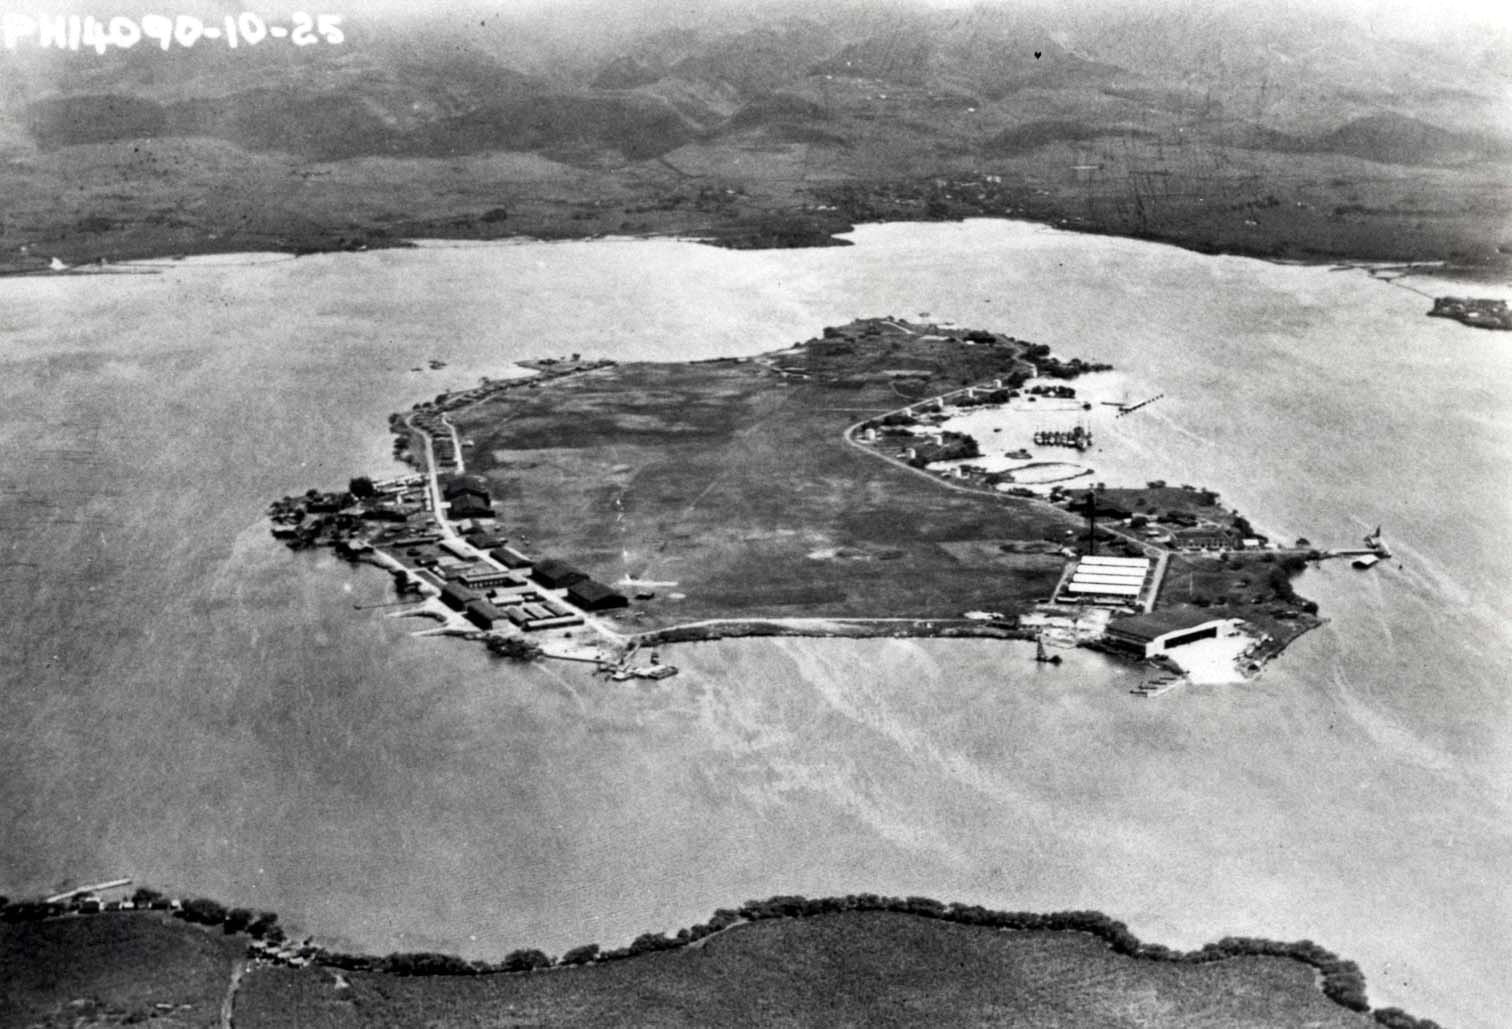 Ford Island in Pearl Harbor, Hawaii looking East.  The Army’s Luke Field facilities are at left and the Navy’s Air Station at right, Mar 25, 1925.